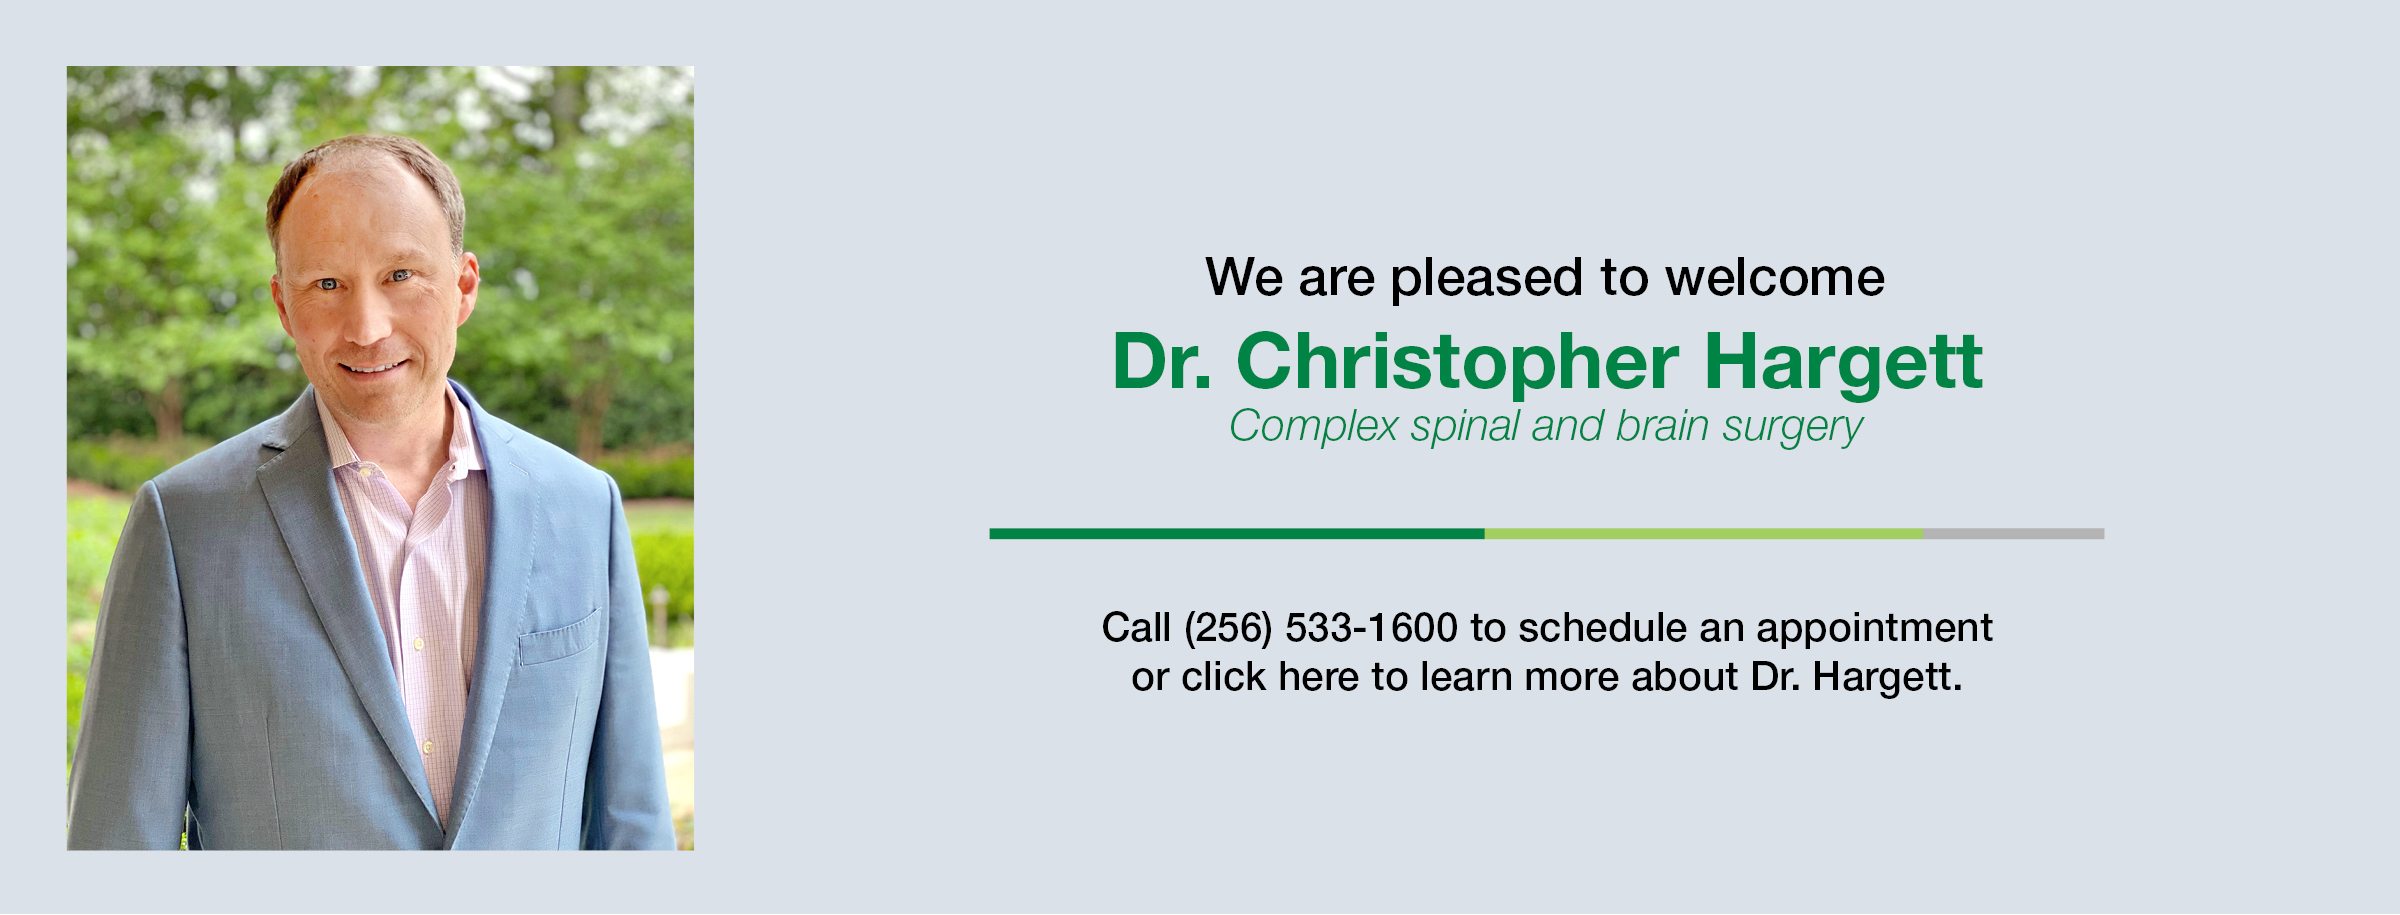 Dr. Hargett - schedule an appointment or learn more 6/21/22